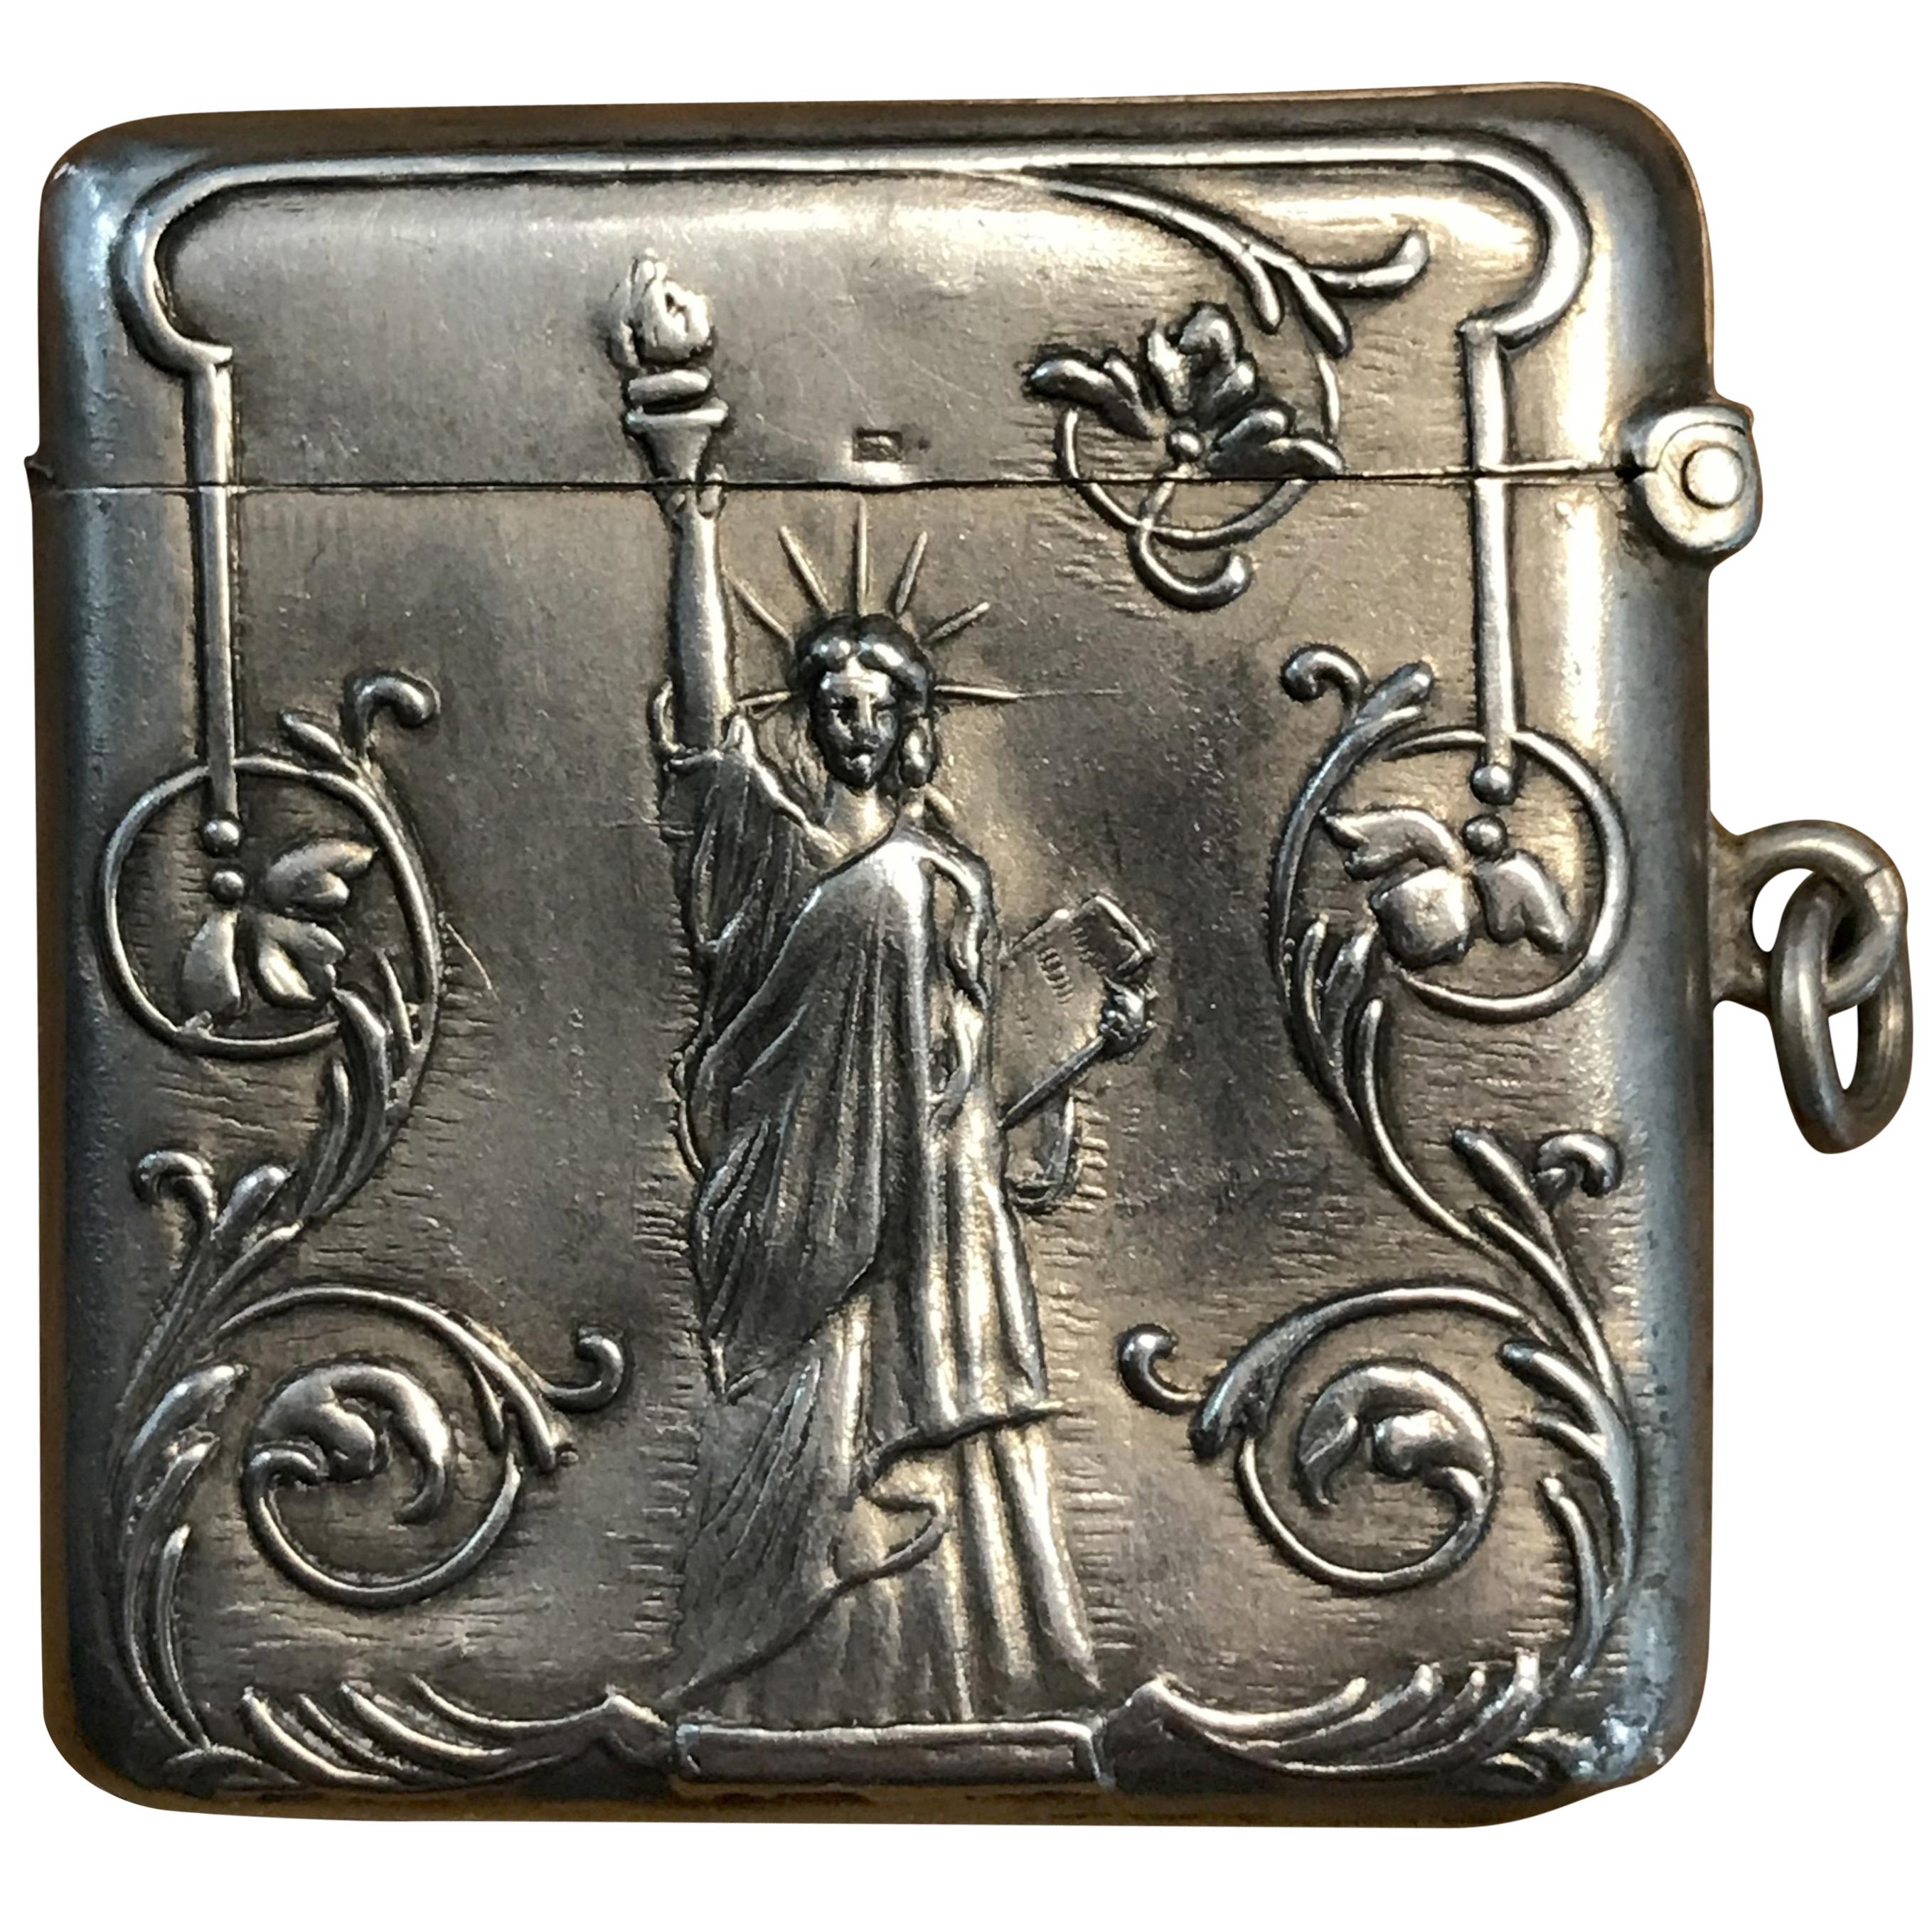 Lovely 800 Grade Solid Silver Vesta Case Depicting Statue of Liberty in America